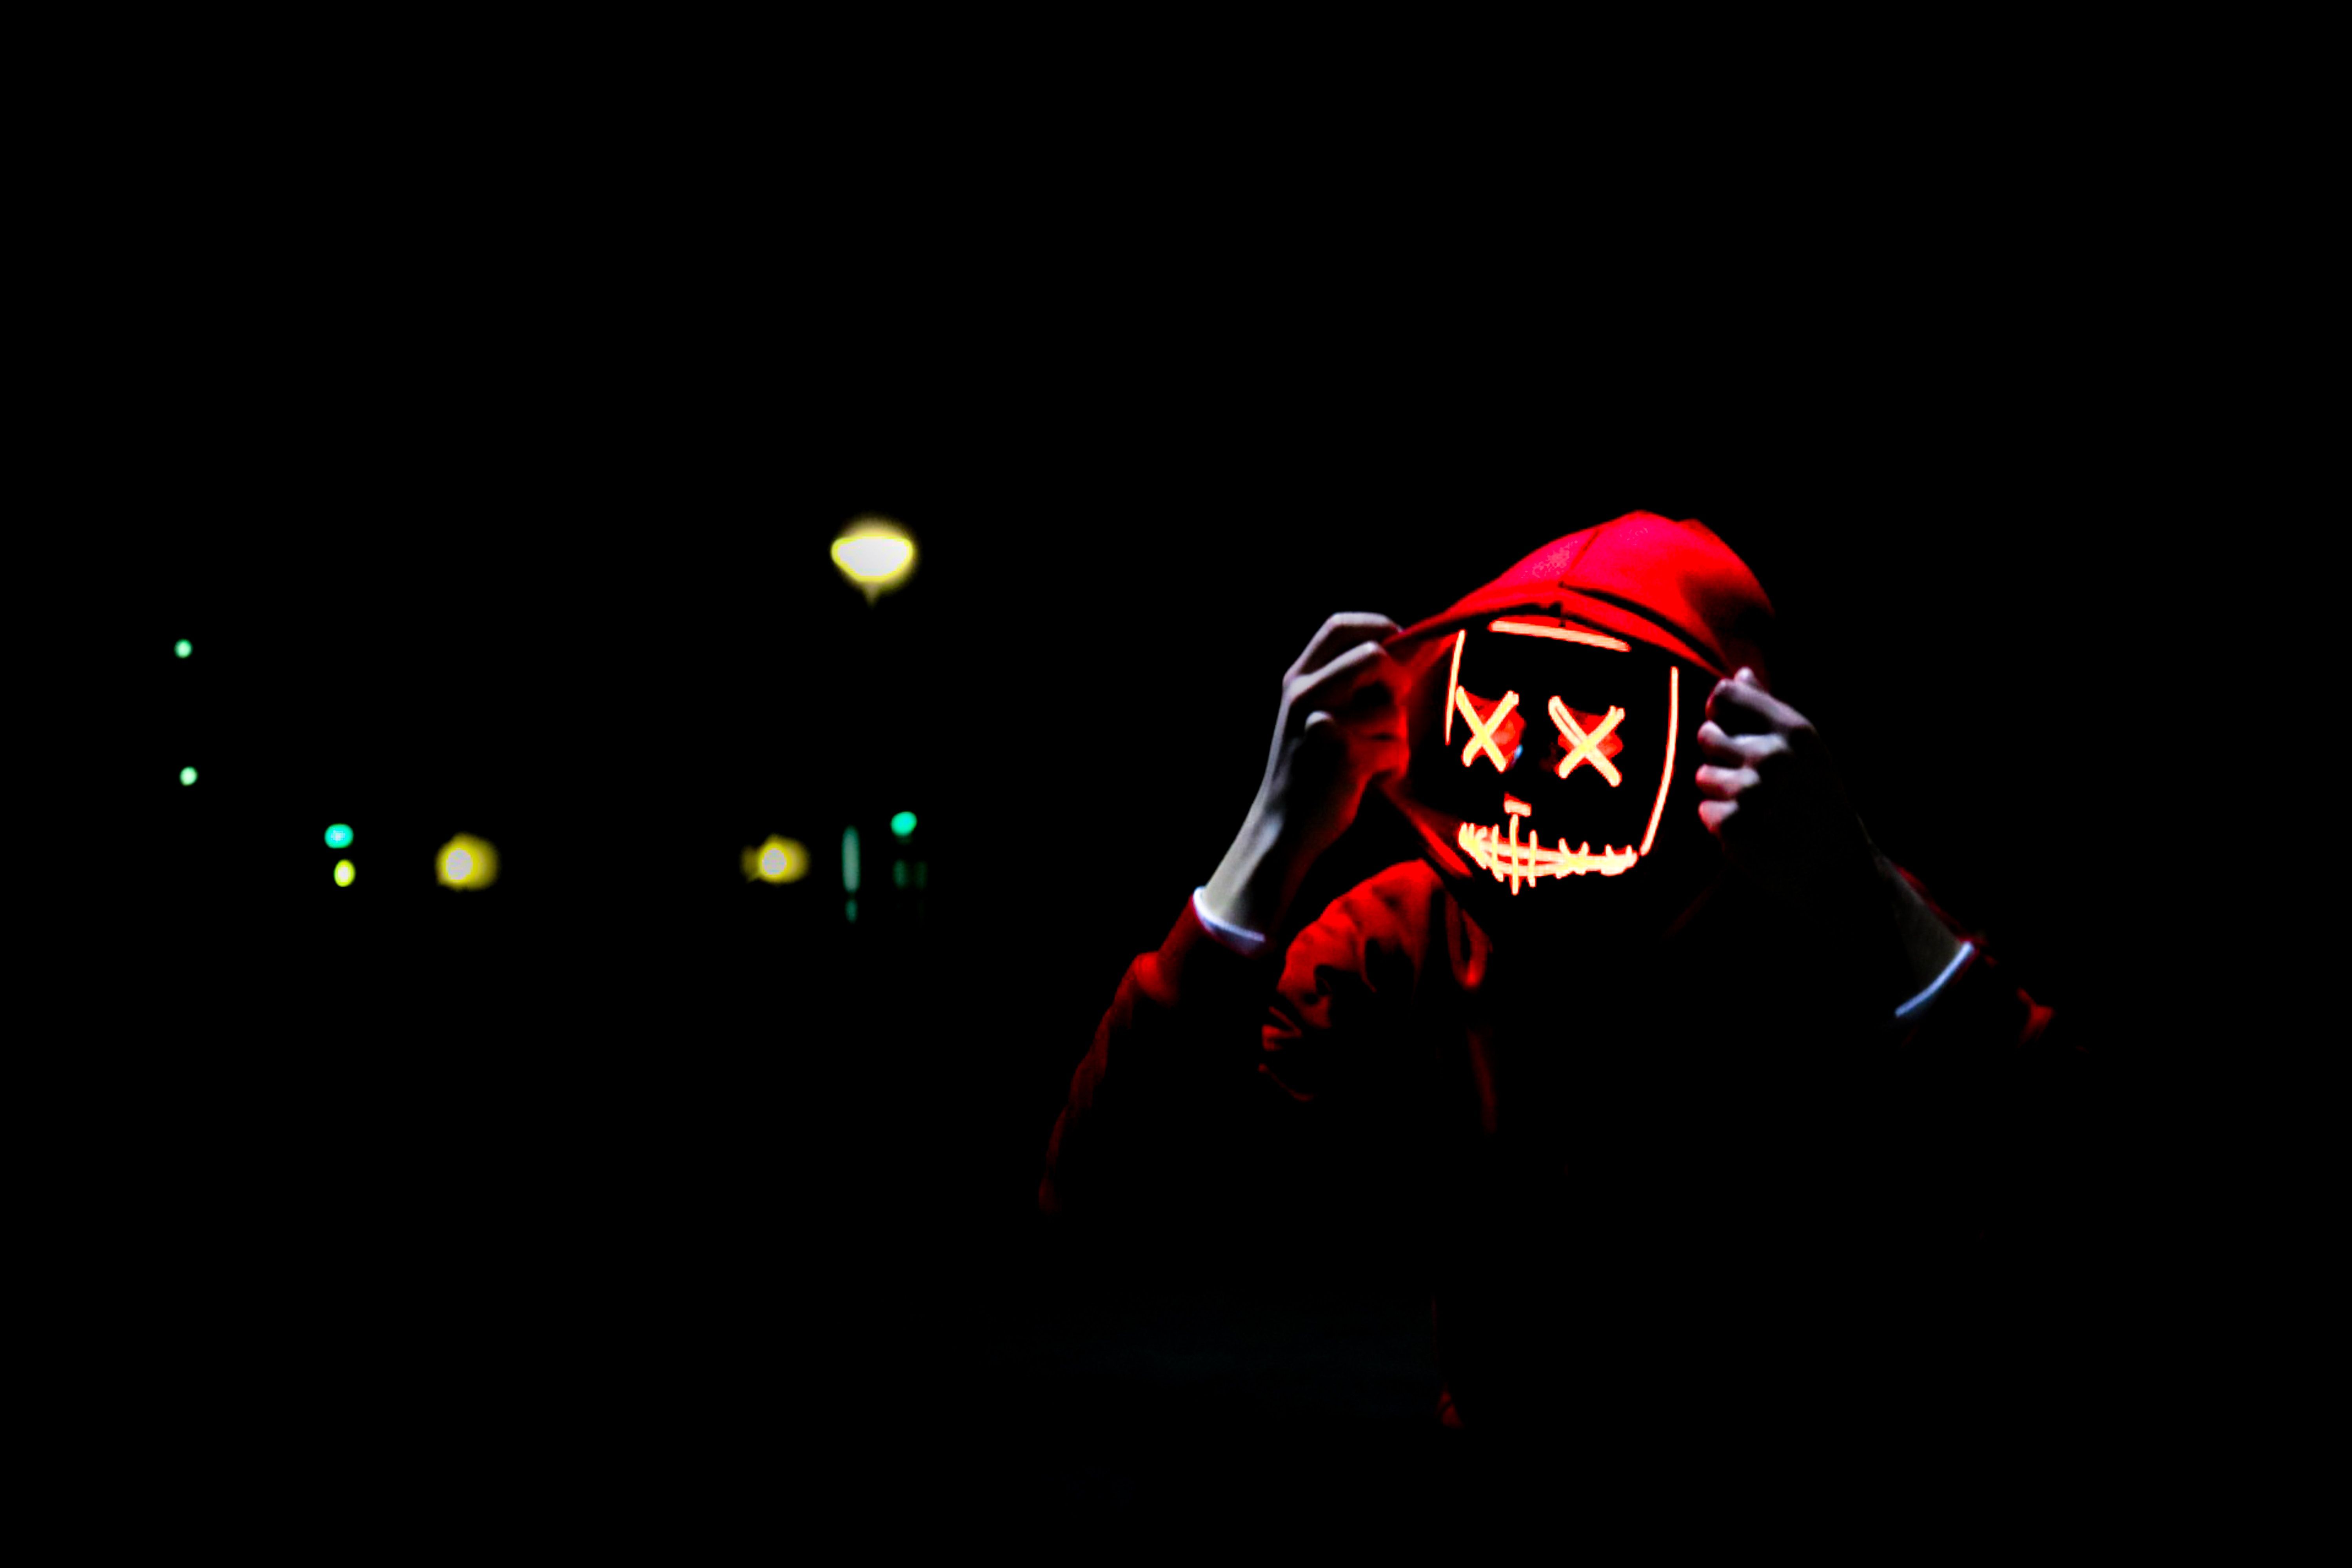 5999x3999 #red, #skull face, #mask, #illustration, #cool, #illuminated, #dead, #lines, #creepy, #halloween pumpkin, #Free picture, # halloween, #hoodie, #dark background, #neon light, #face, #light, #person, #angry, #skull, #dark. Mocah.org HD